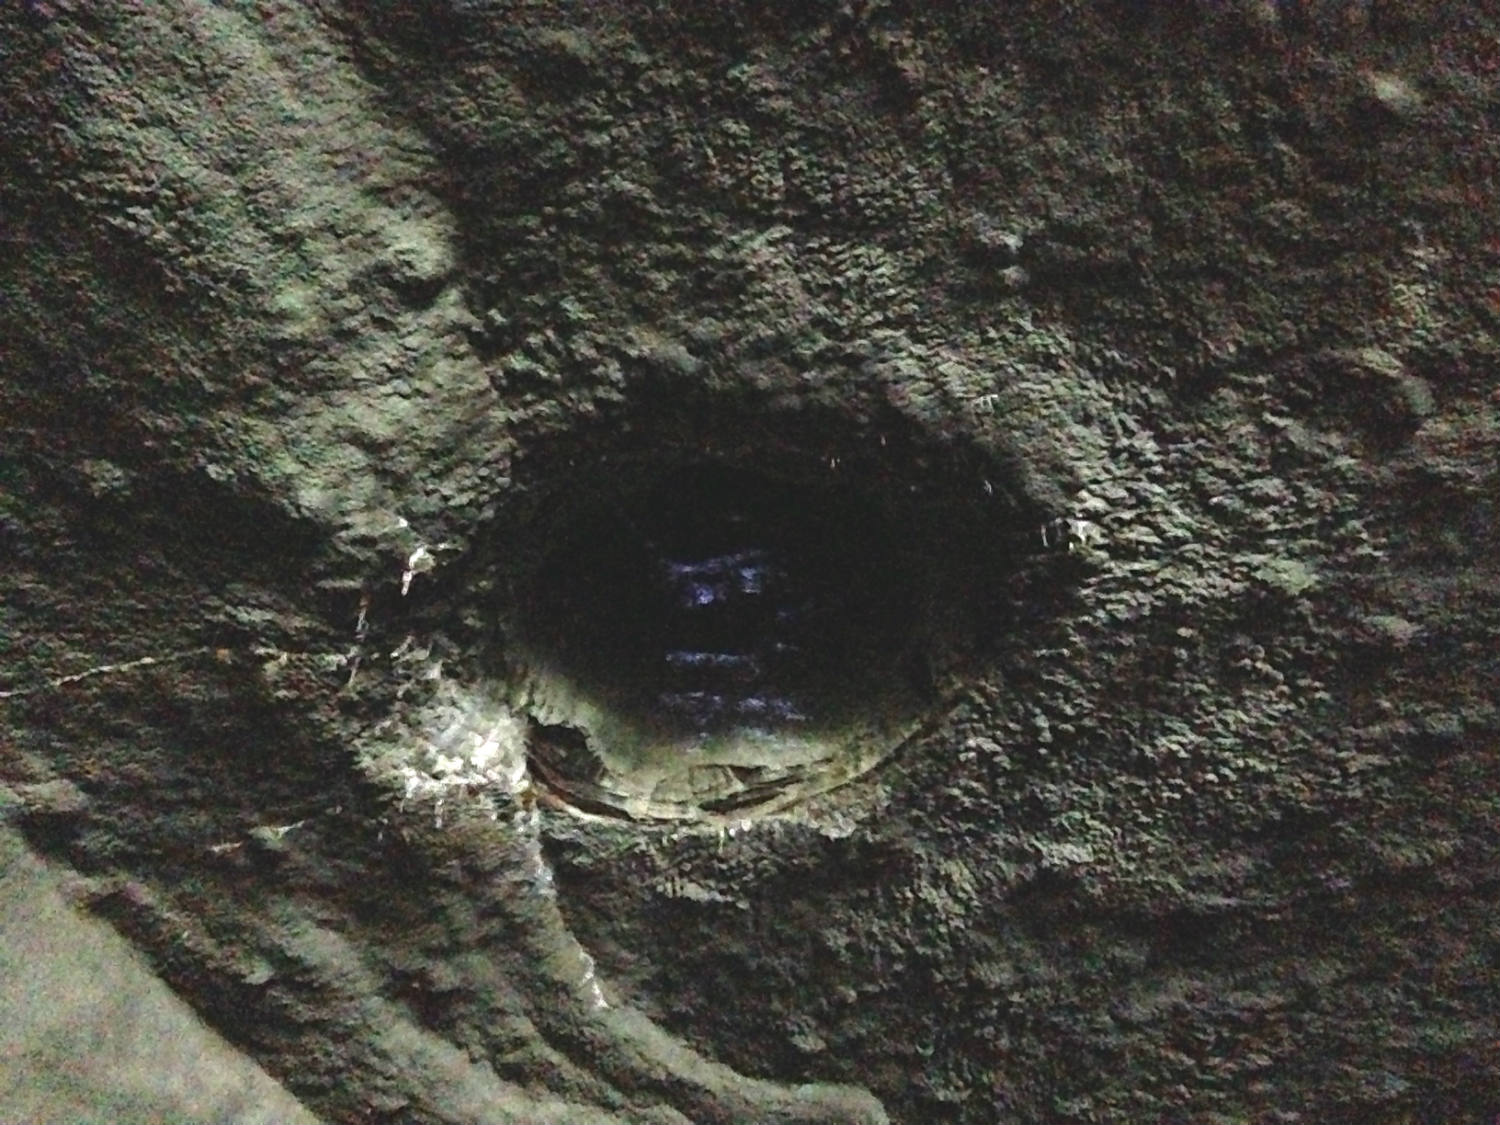 Ceiling Drainage in the Lower Falls Cave